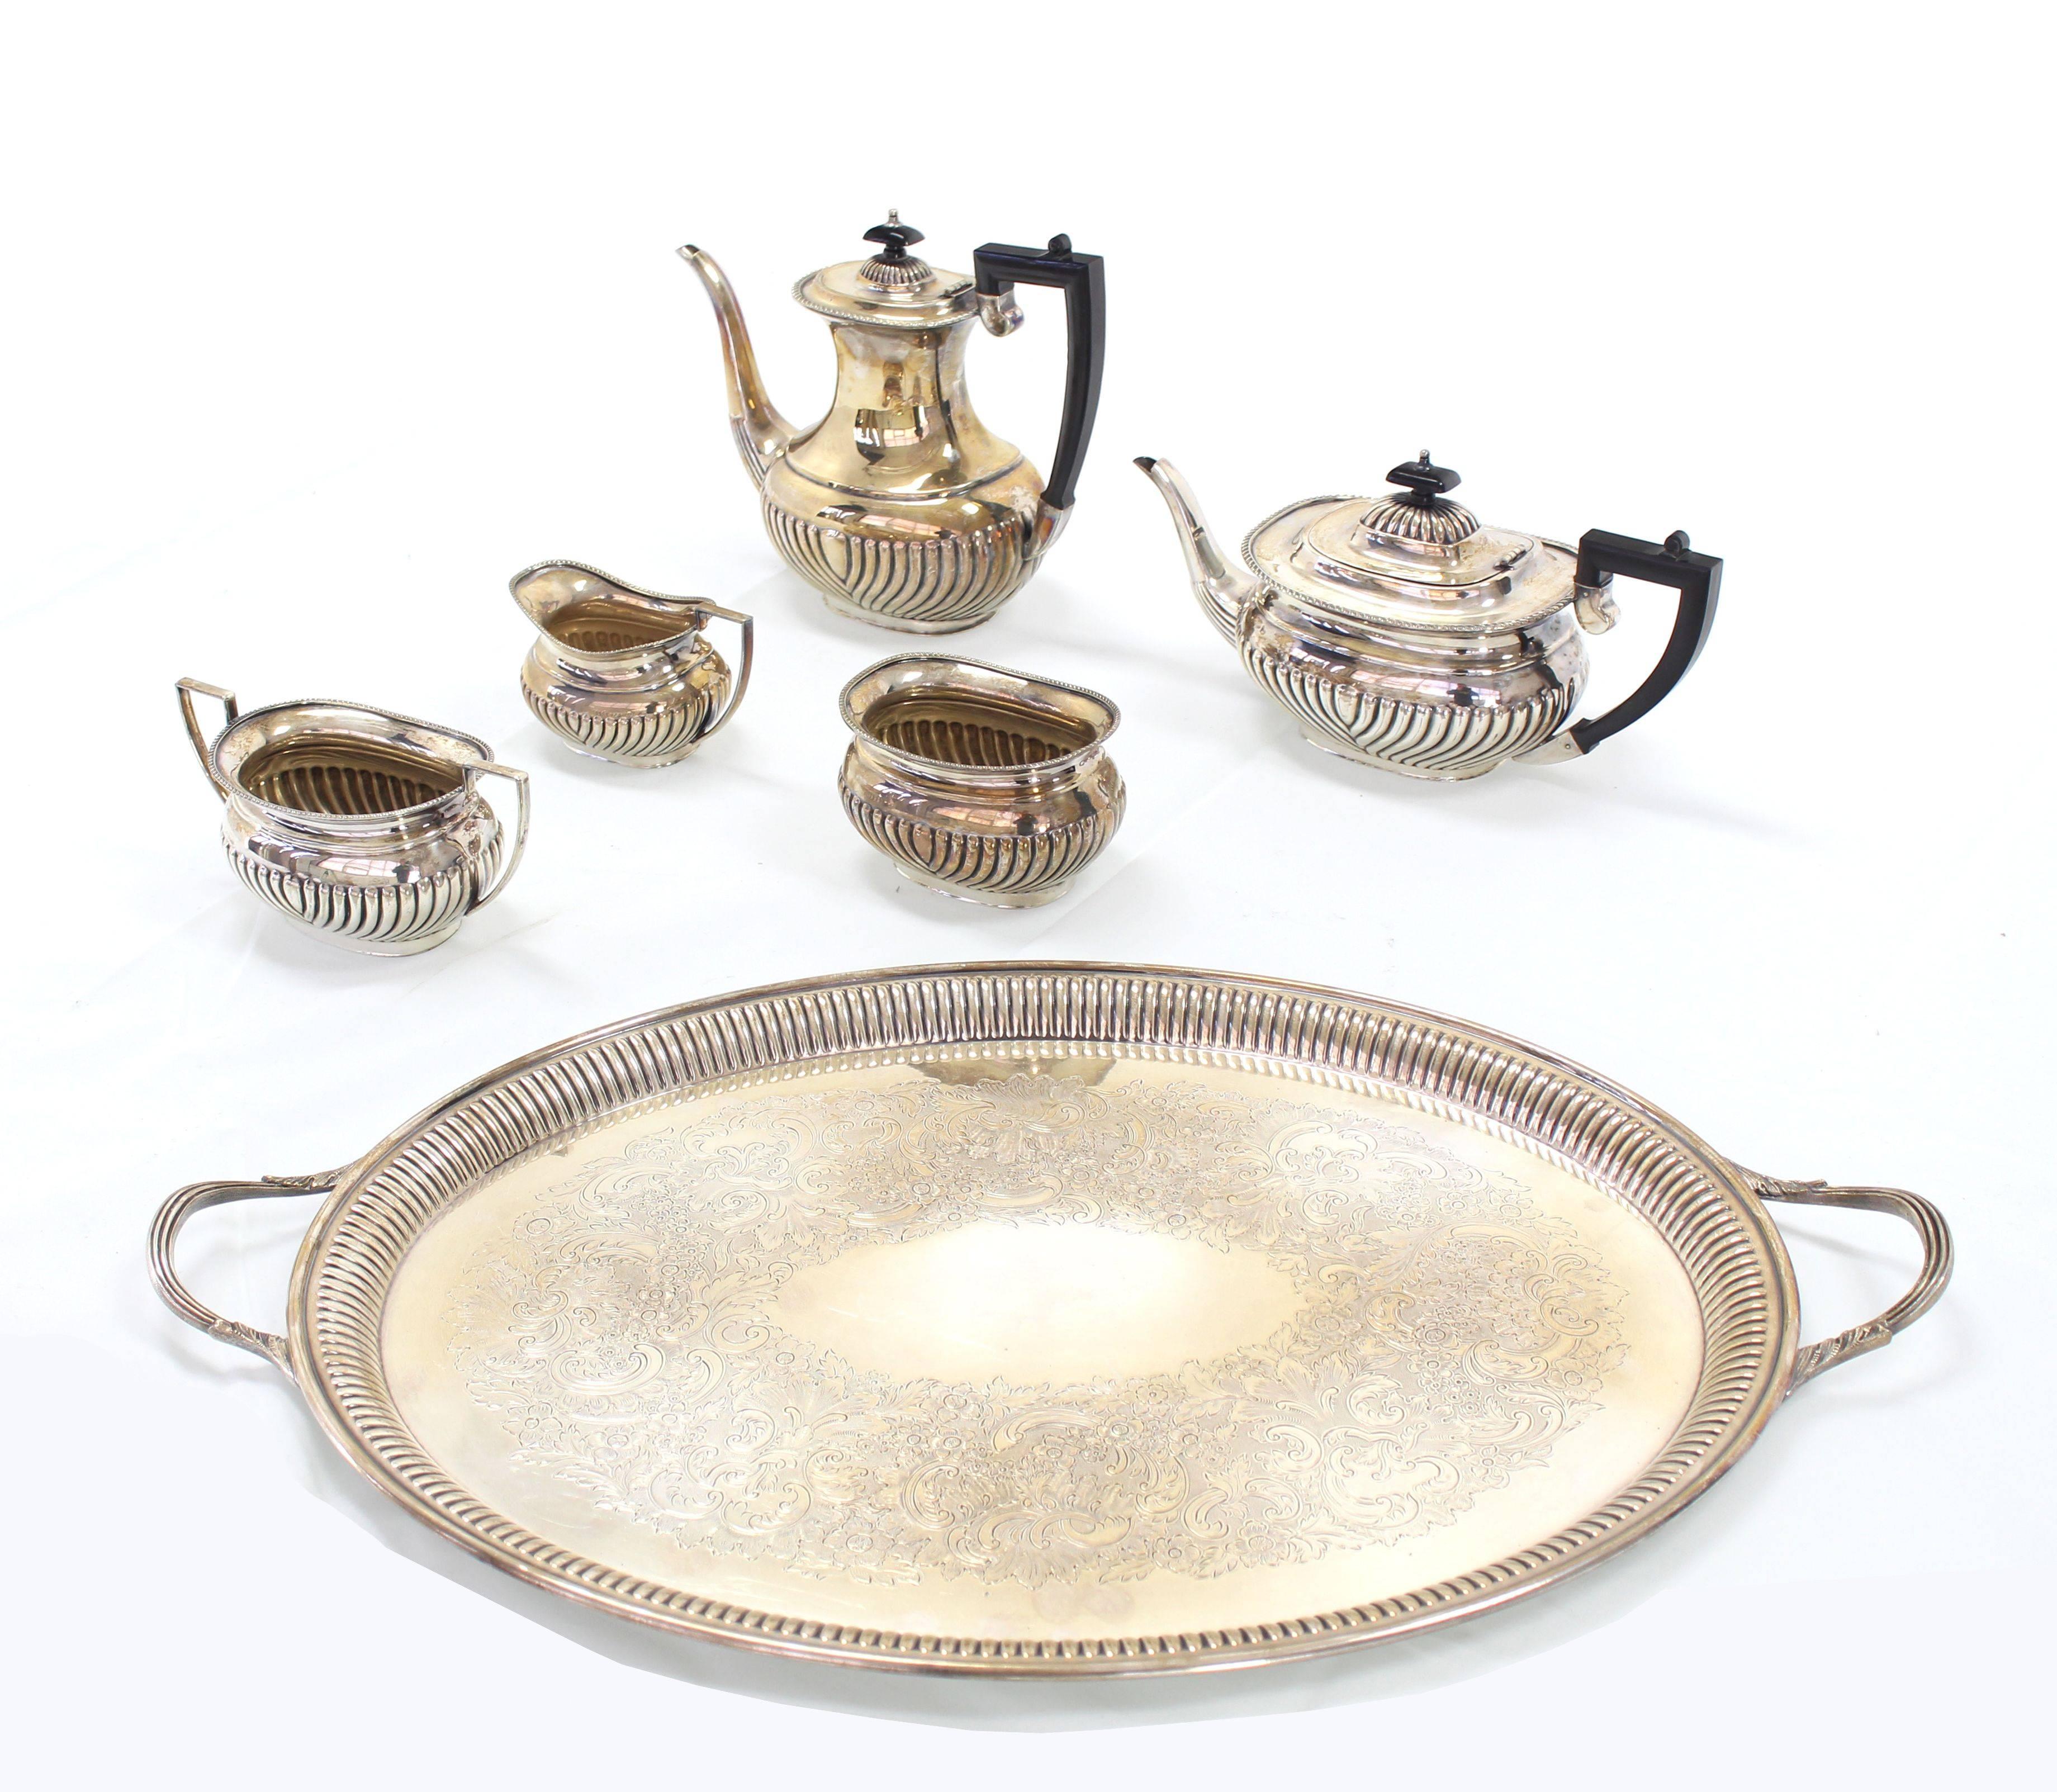 Vintage English silver plated Sheffield tea or coffee set. Excellent condition.